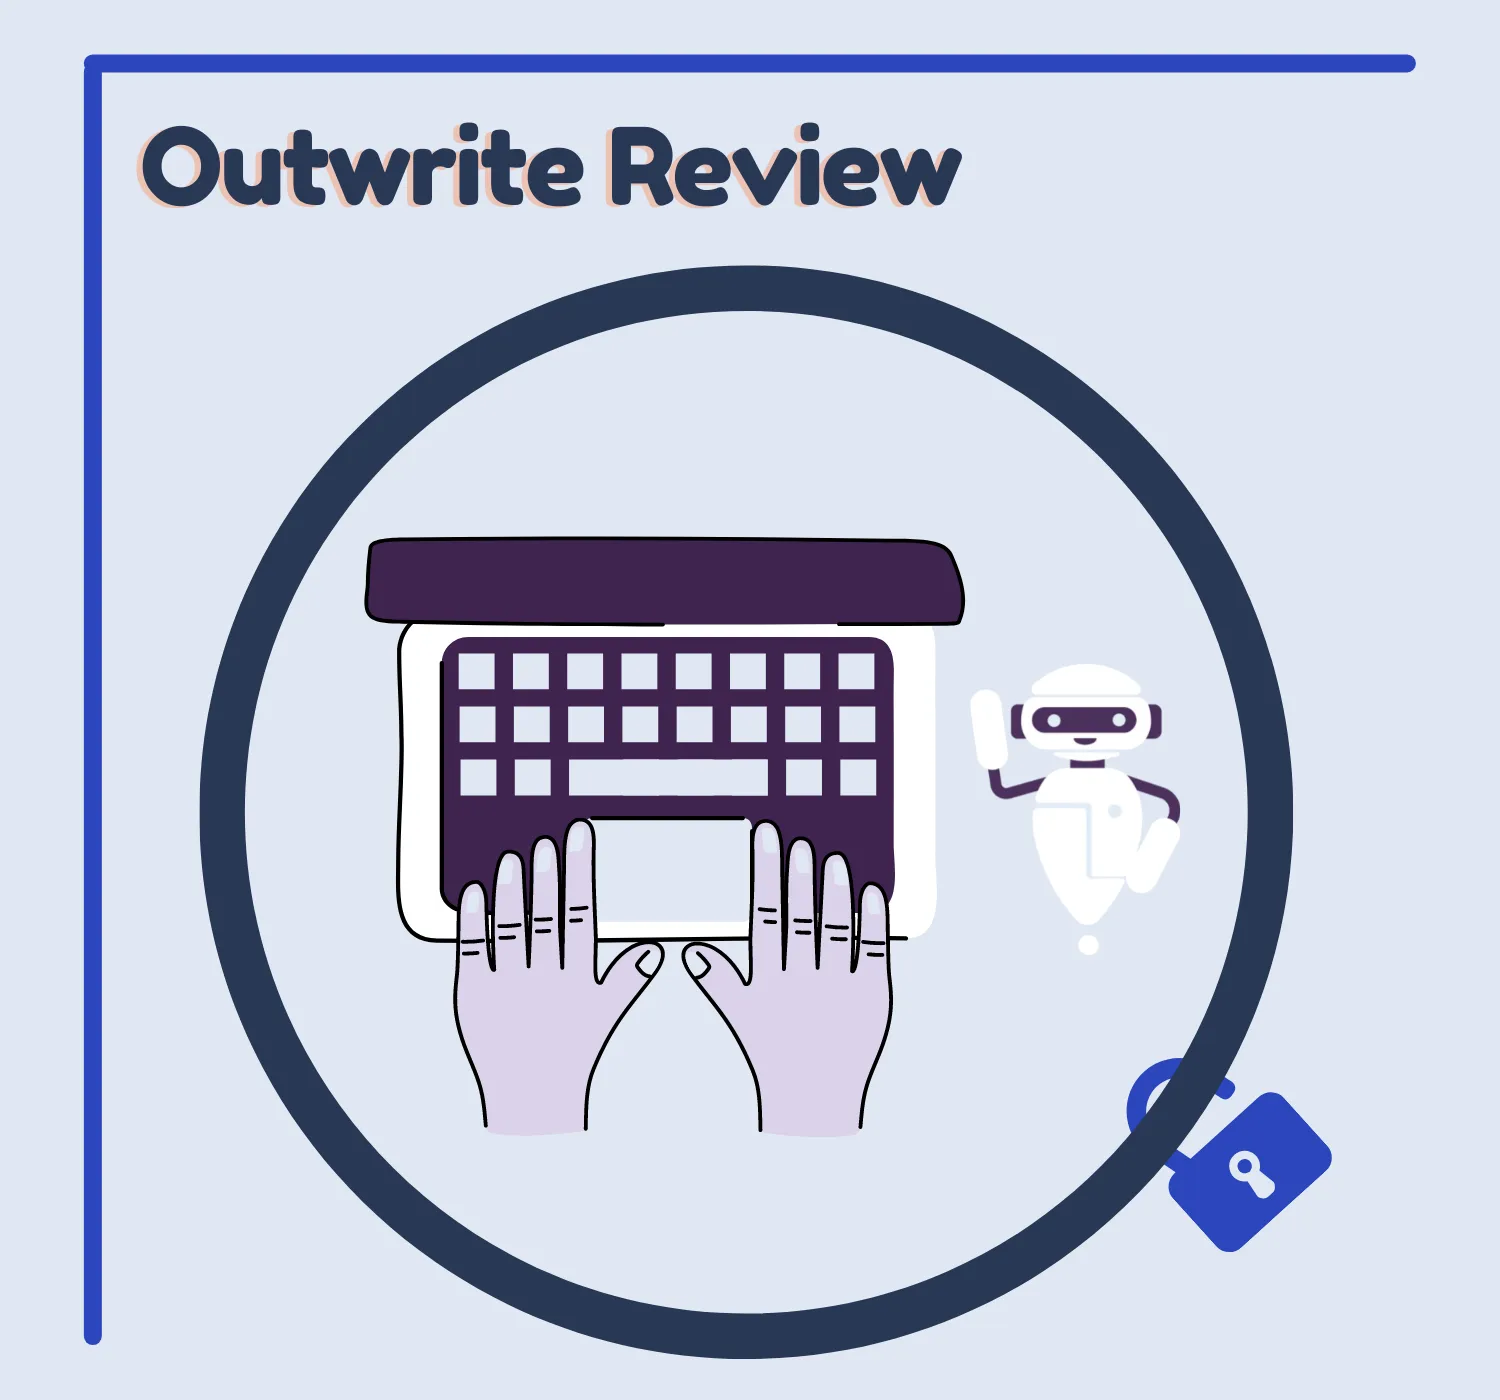 Outwrite Review